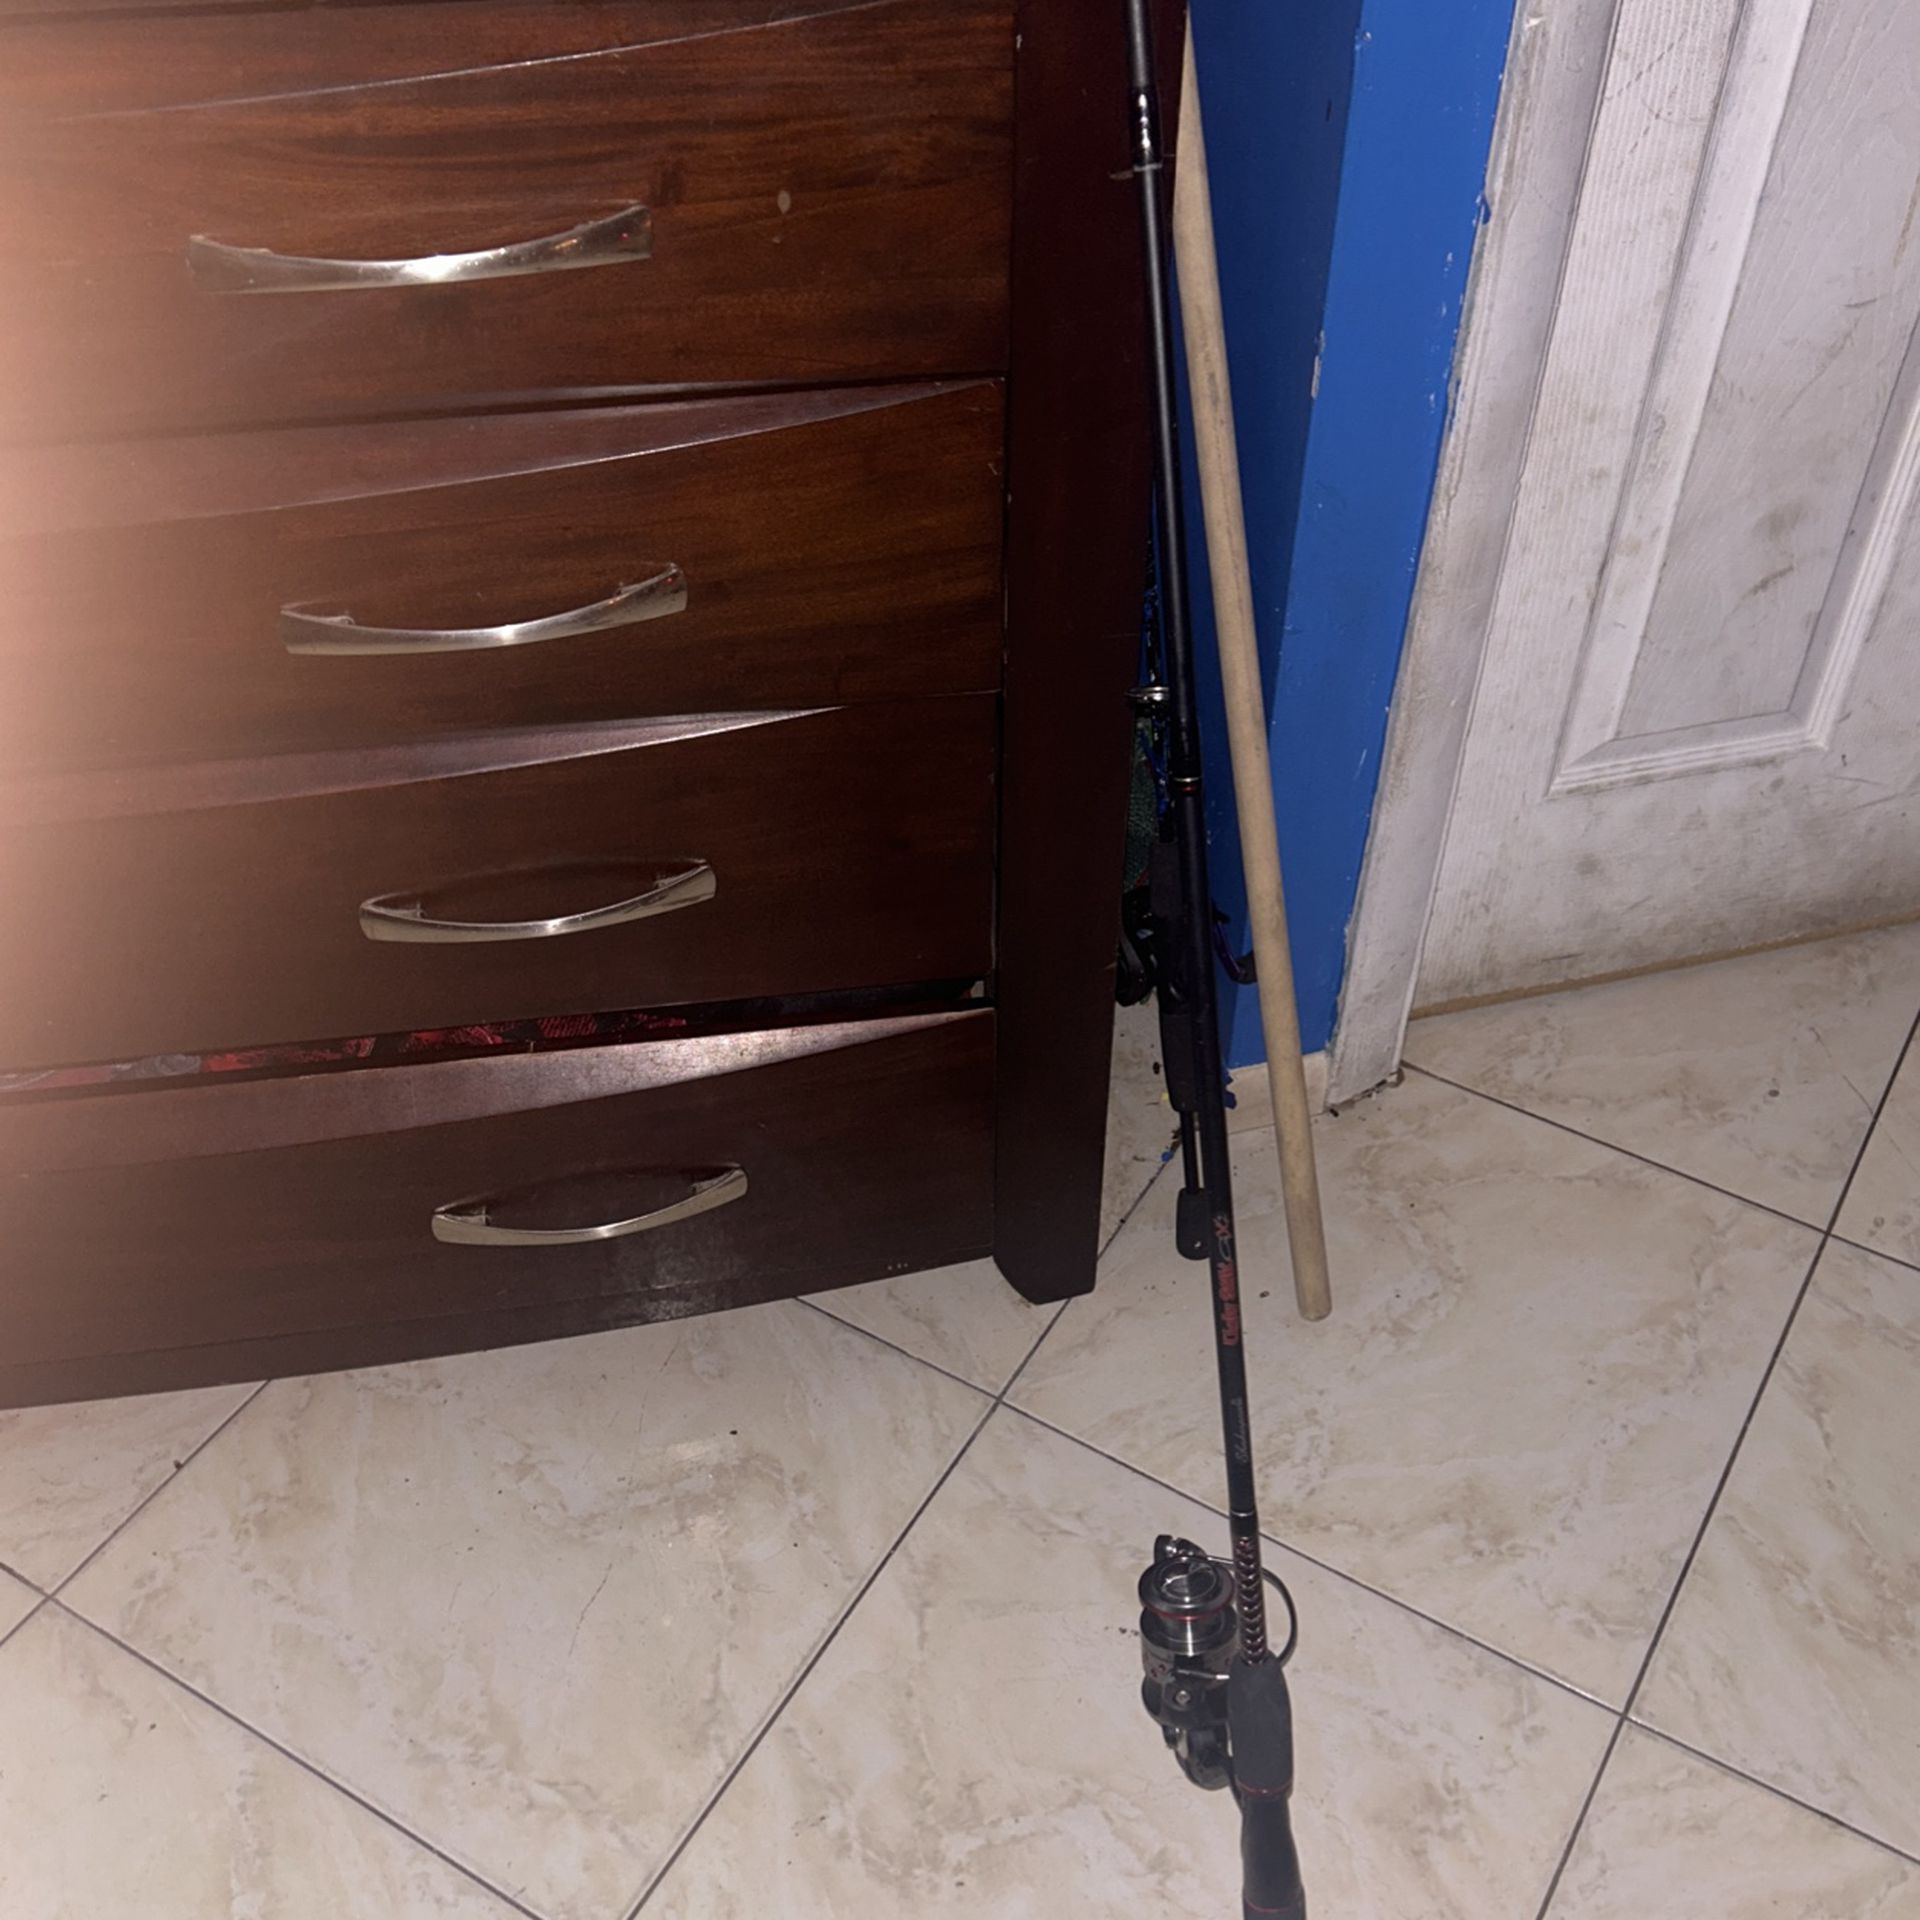 Fishing Rod And Reels